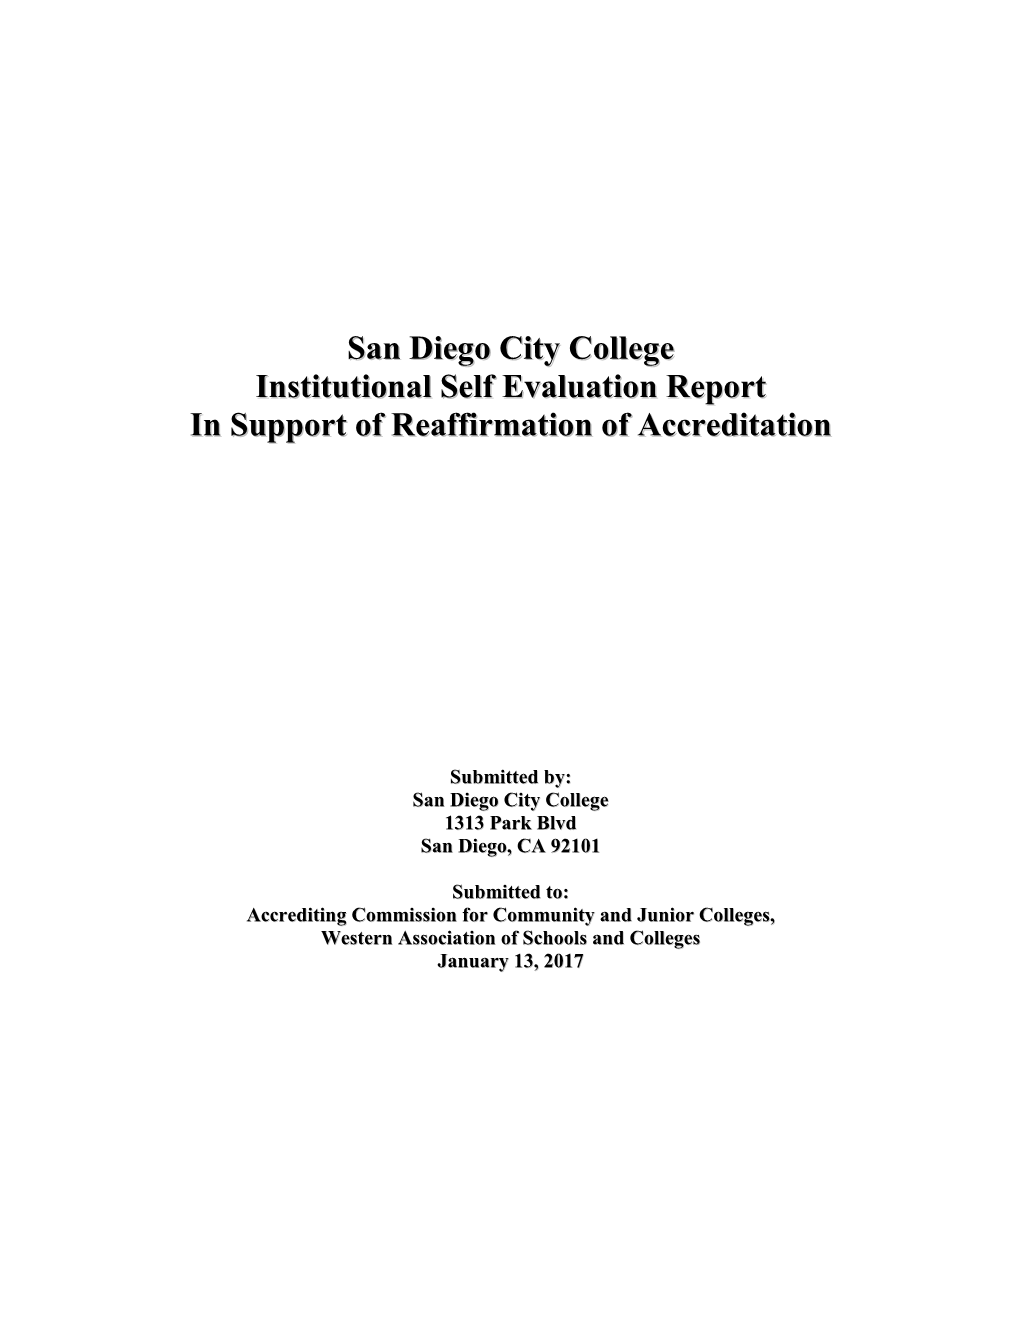 San Diego City College Institutional Self Evaluation Report in Support of Reaffirmation of Accreditation